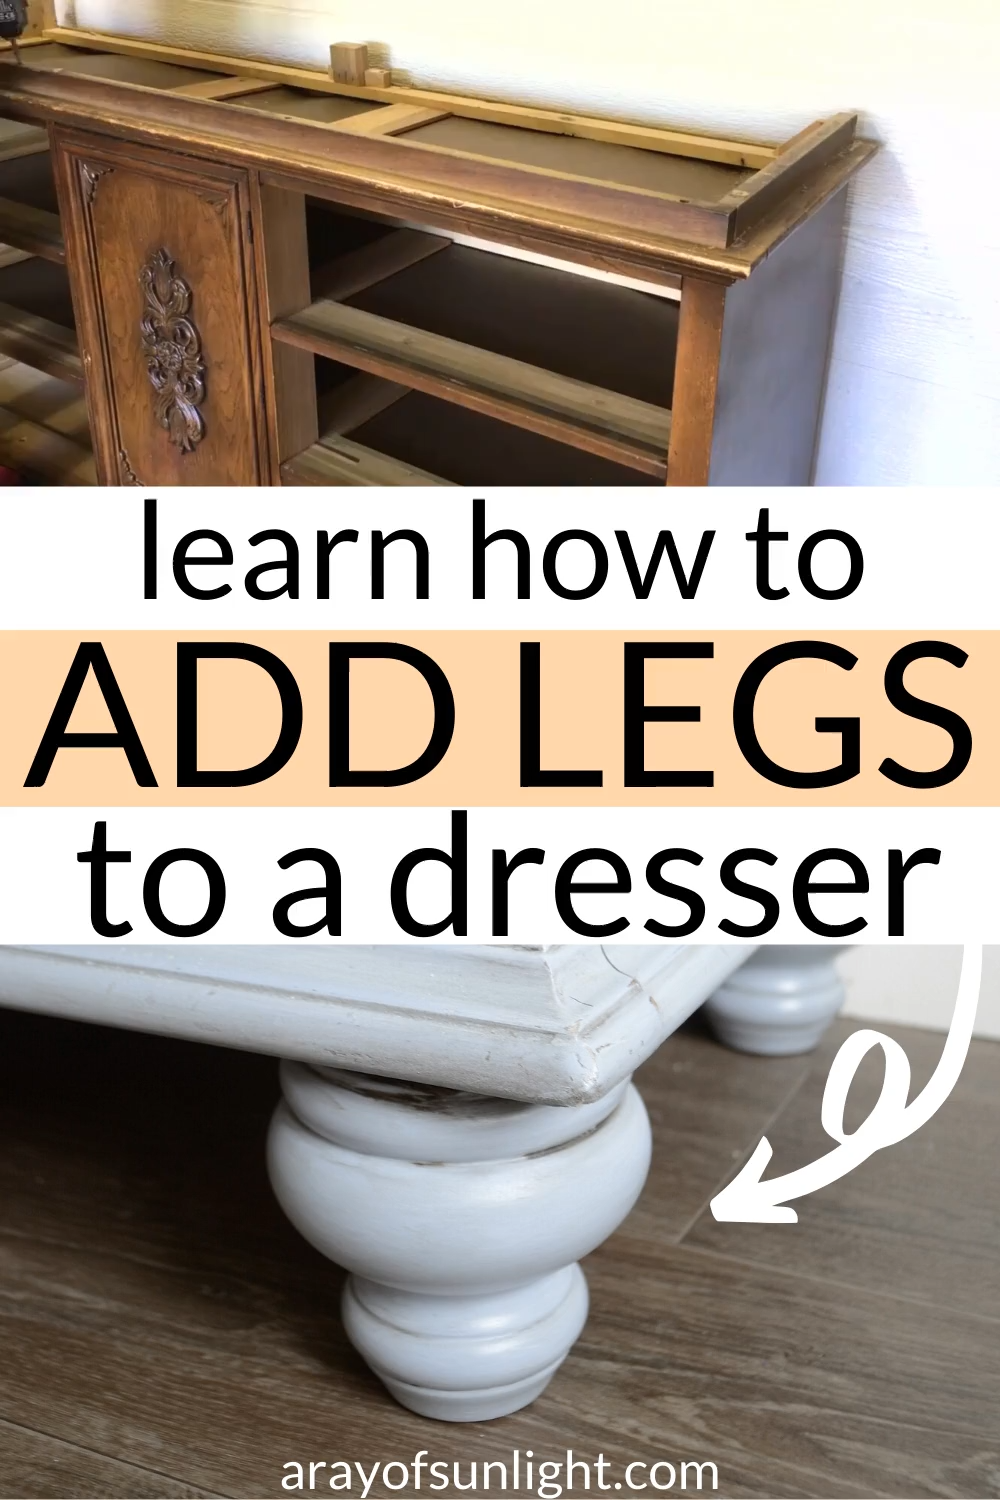 The Best Way to Add Legs to a Dresser - The Best Way to Add Legs to a Dresser -   17 diy Easy table ideas